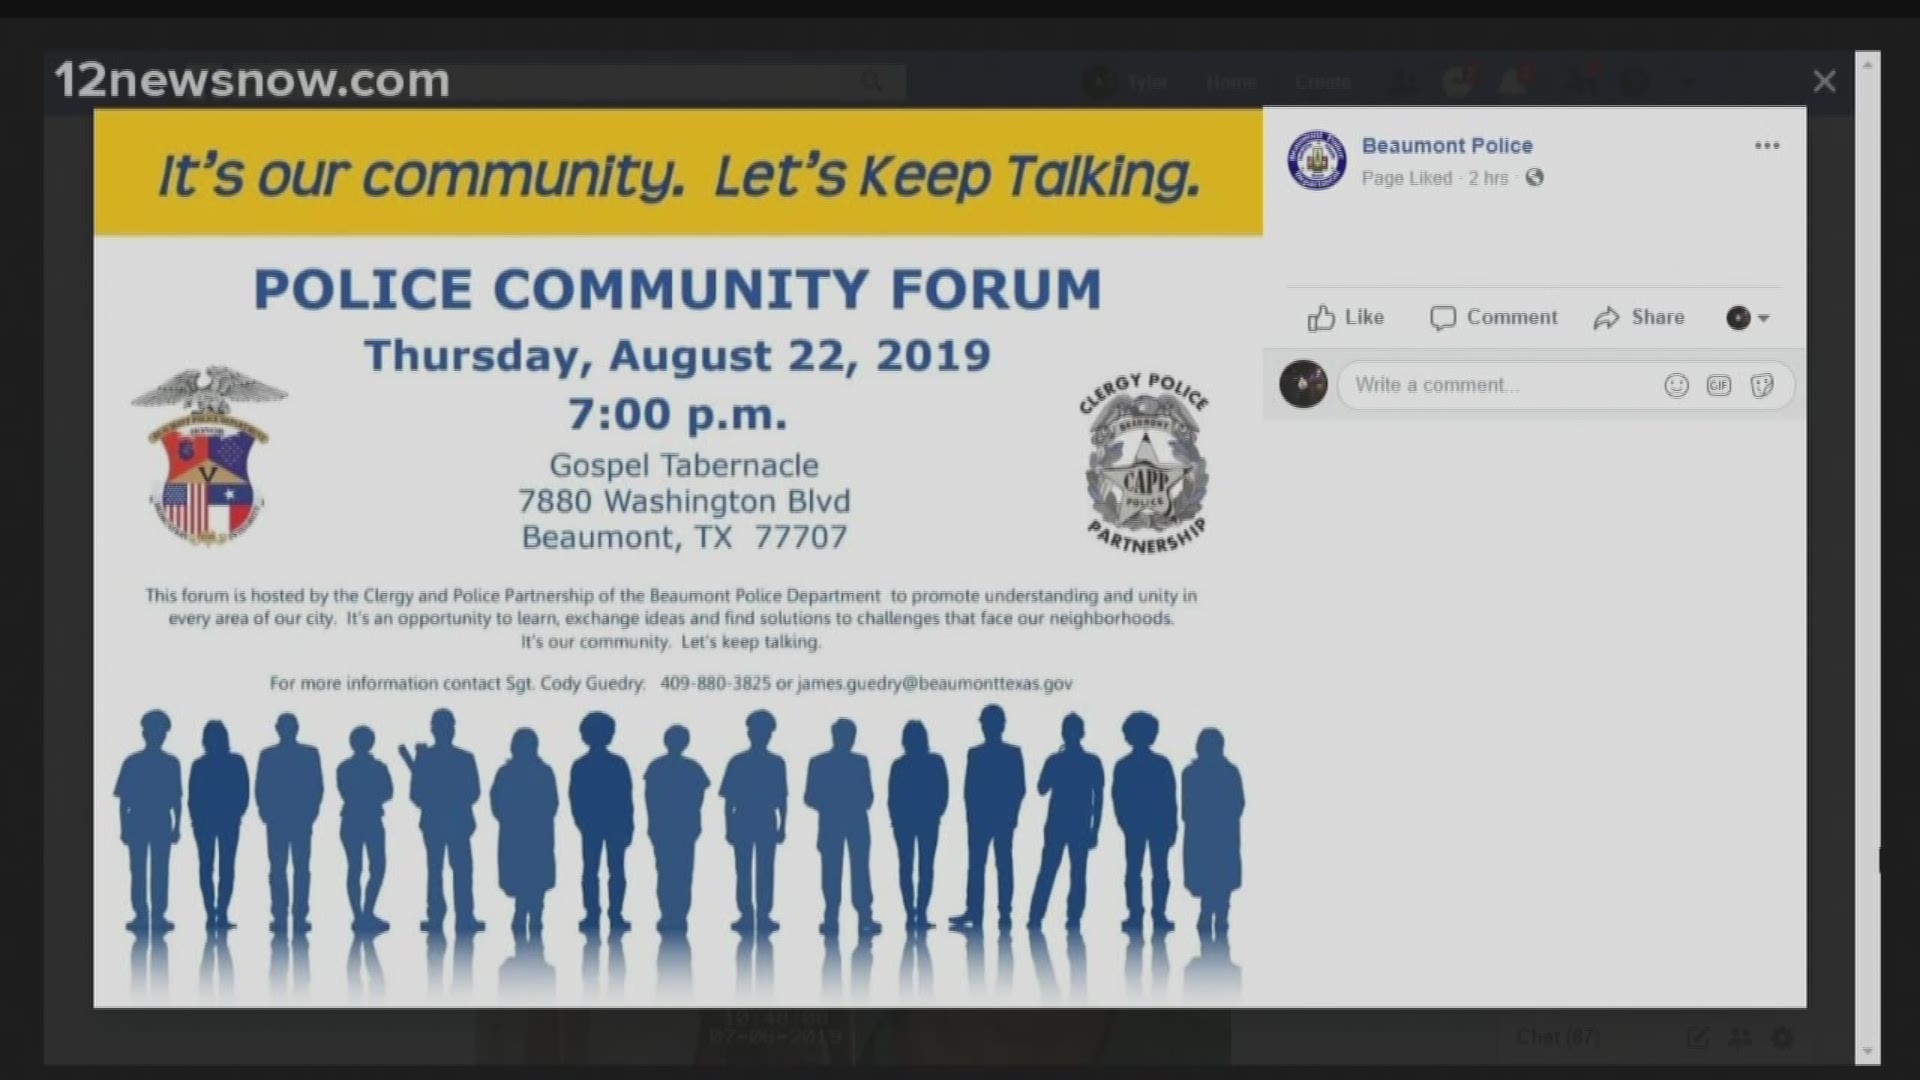 Beaumont Police Department is hosting a community forum on Thursday, August 22 at 7 p.m. at Gospel Tabernacle at 7880 Washington Blvd. in Beaumont.